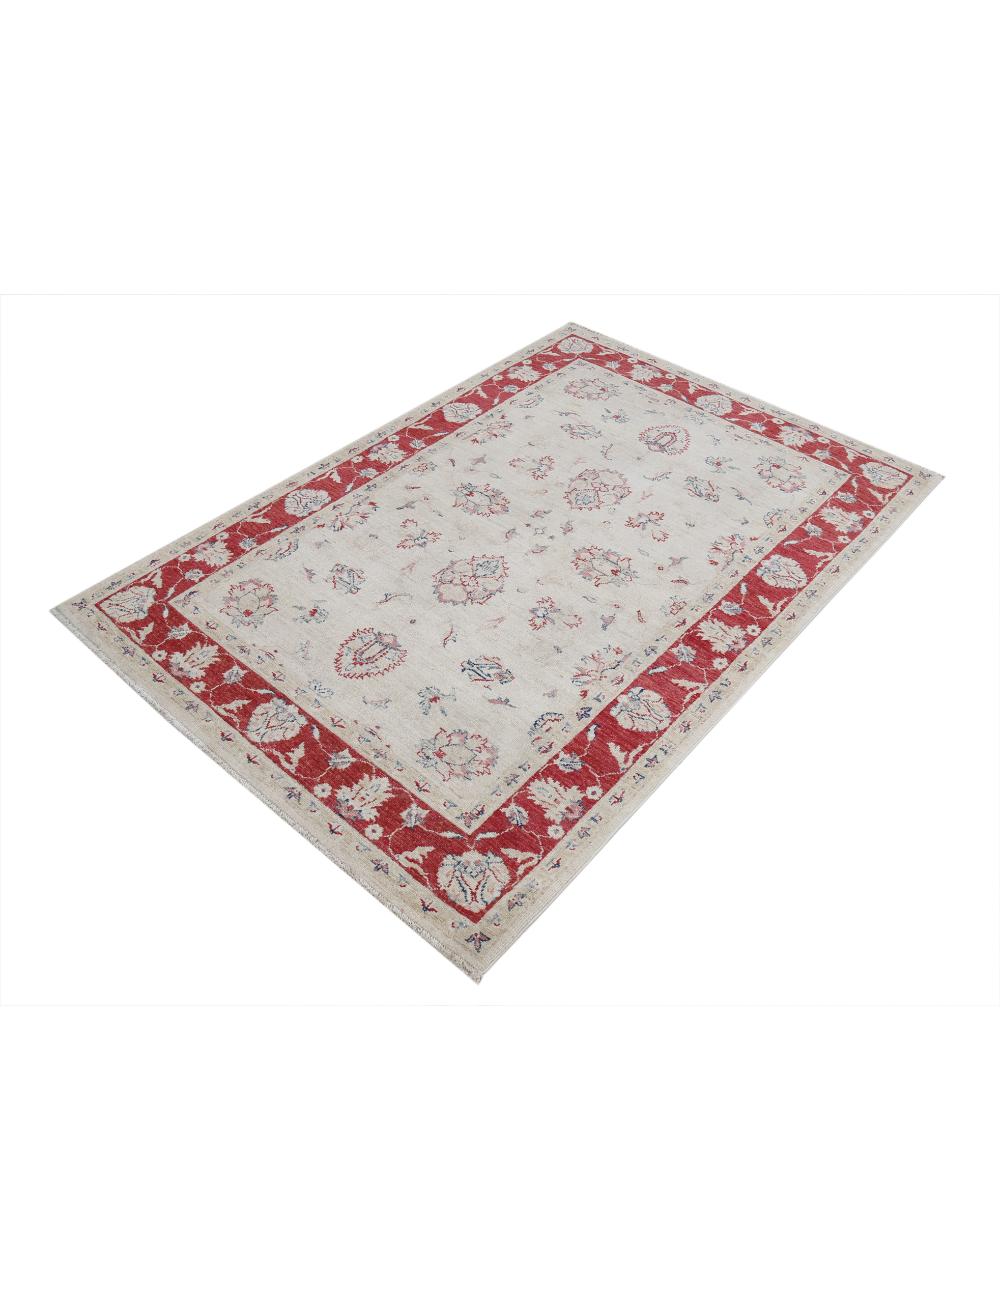 Ziegler 3' 11" X 5' 9" Hand-Knotted Wool Rug 3' 11" X 5' 9" (119 X 175) / Ivory / Red